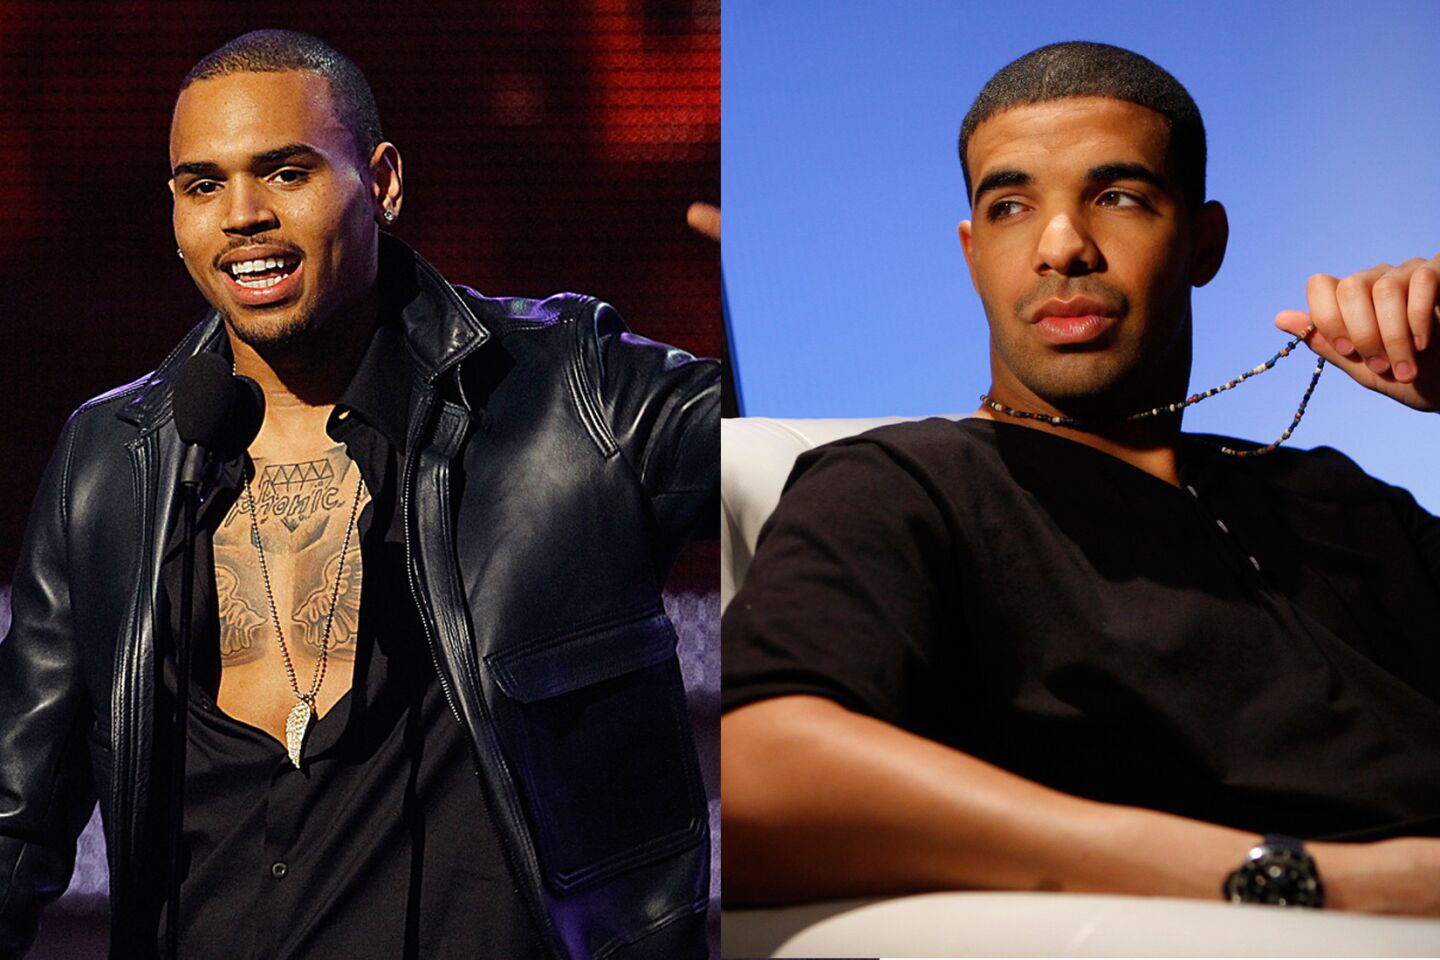 Hip-hop stars Chris Brown and Drake were reportedly in a nightclub brawl in New York in June 2012 that left four people injured.Speculation quickly arose that the blow-up may have involved Brown's former girlfriend Rihanna, with whom Drake had been seen recently.